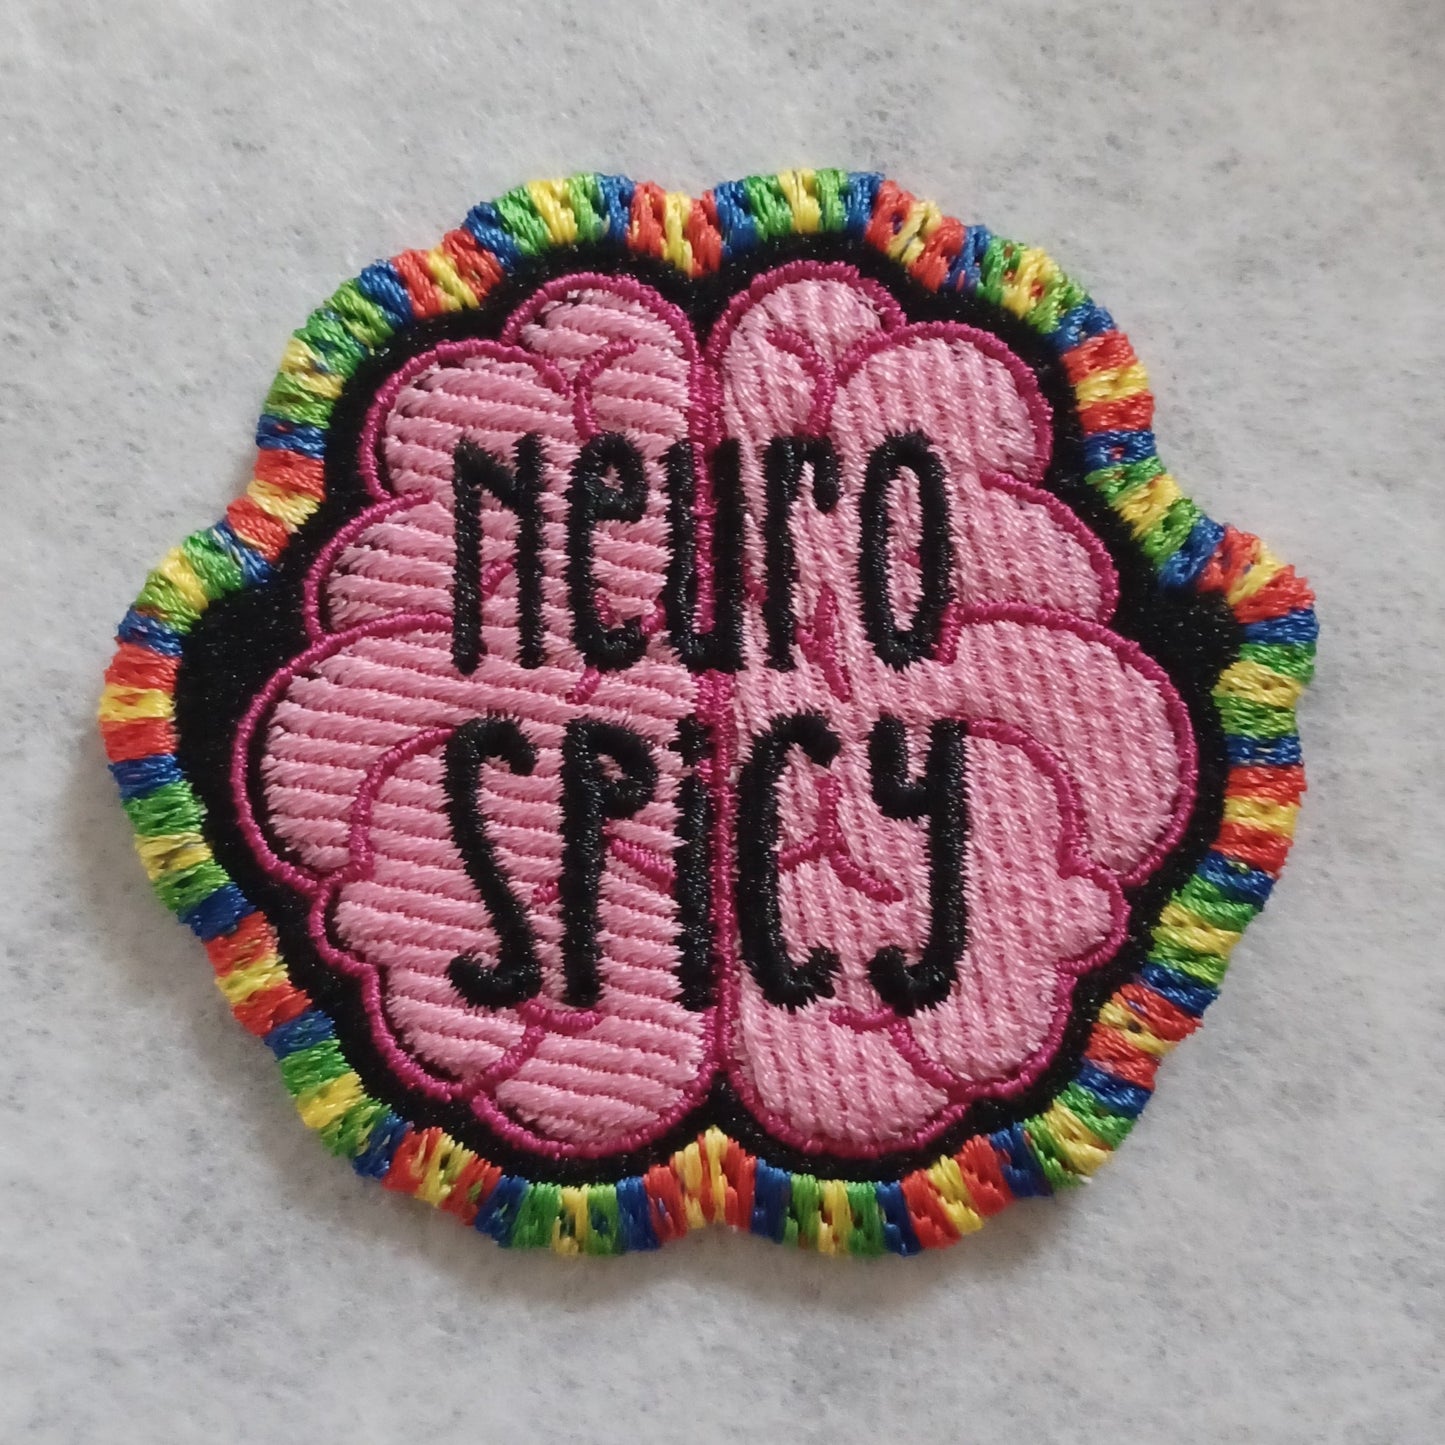 Neuro Spicy Embroidered Patch